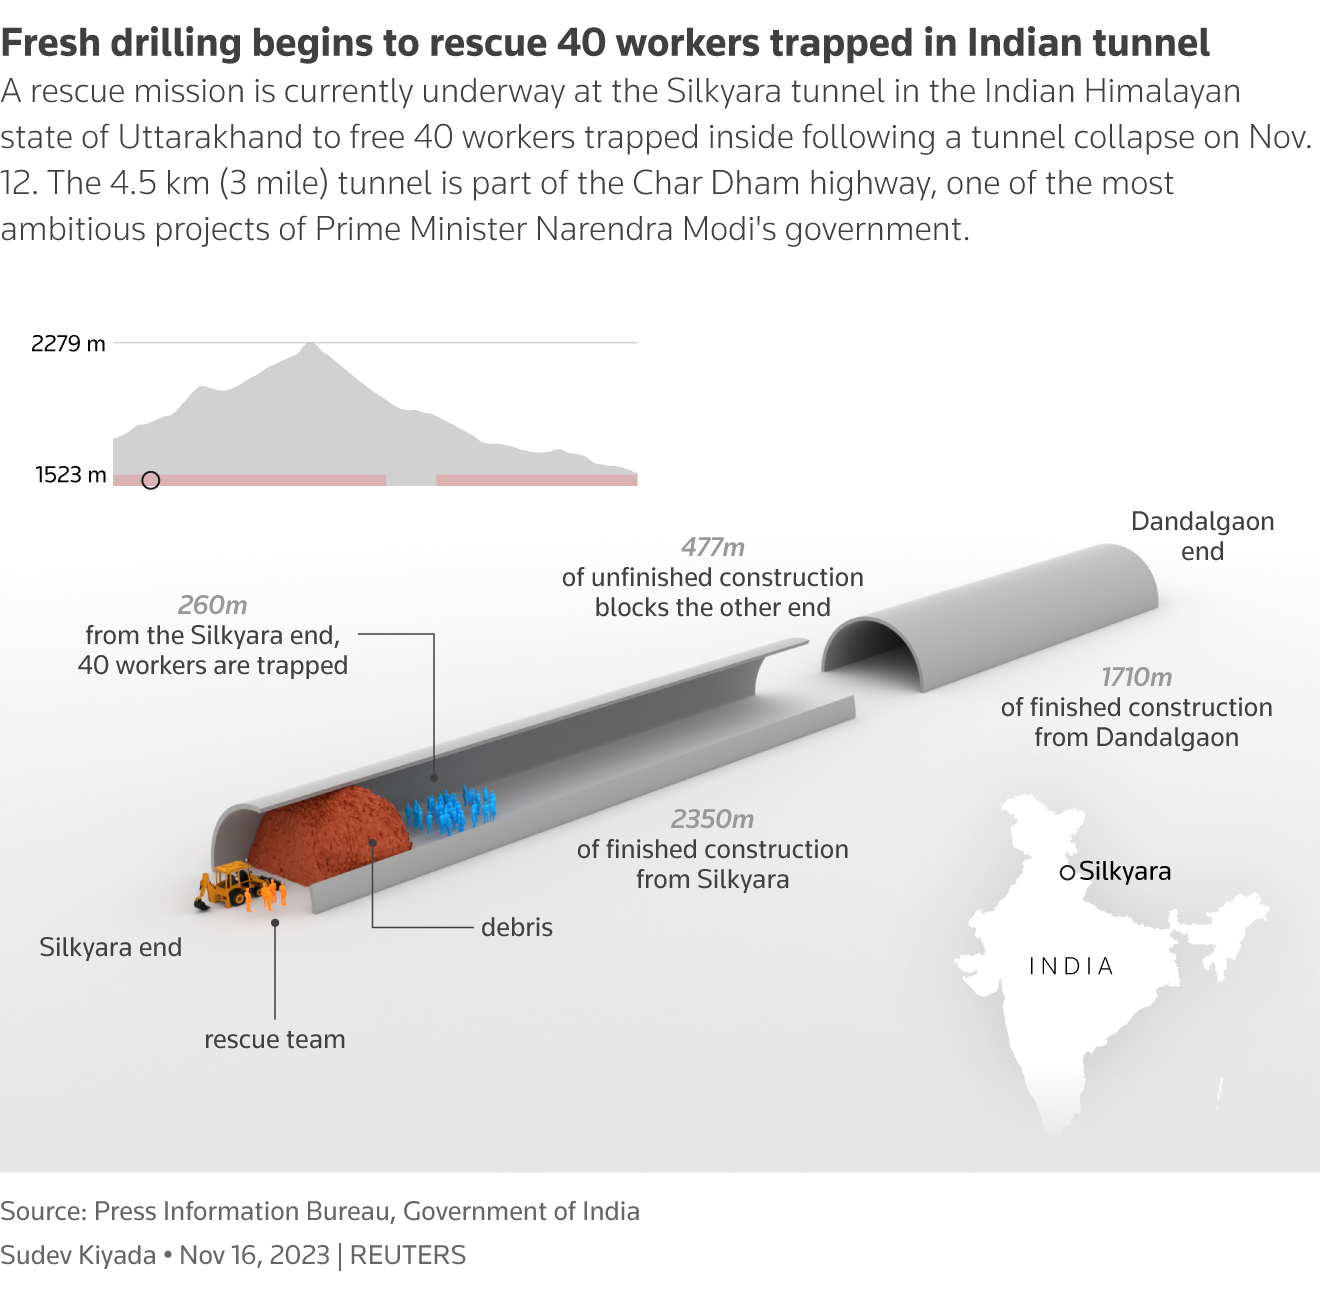 A rescue mission is currently underway at the Silkyara tunnel in Uttarakhand to free 40 workers who are stuck inside following a landslide. Graphic: Reuters